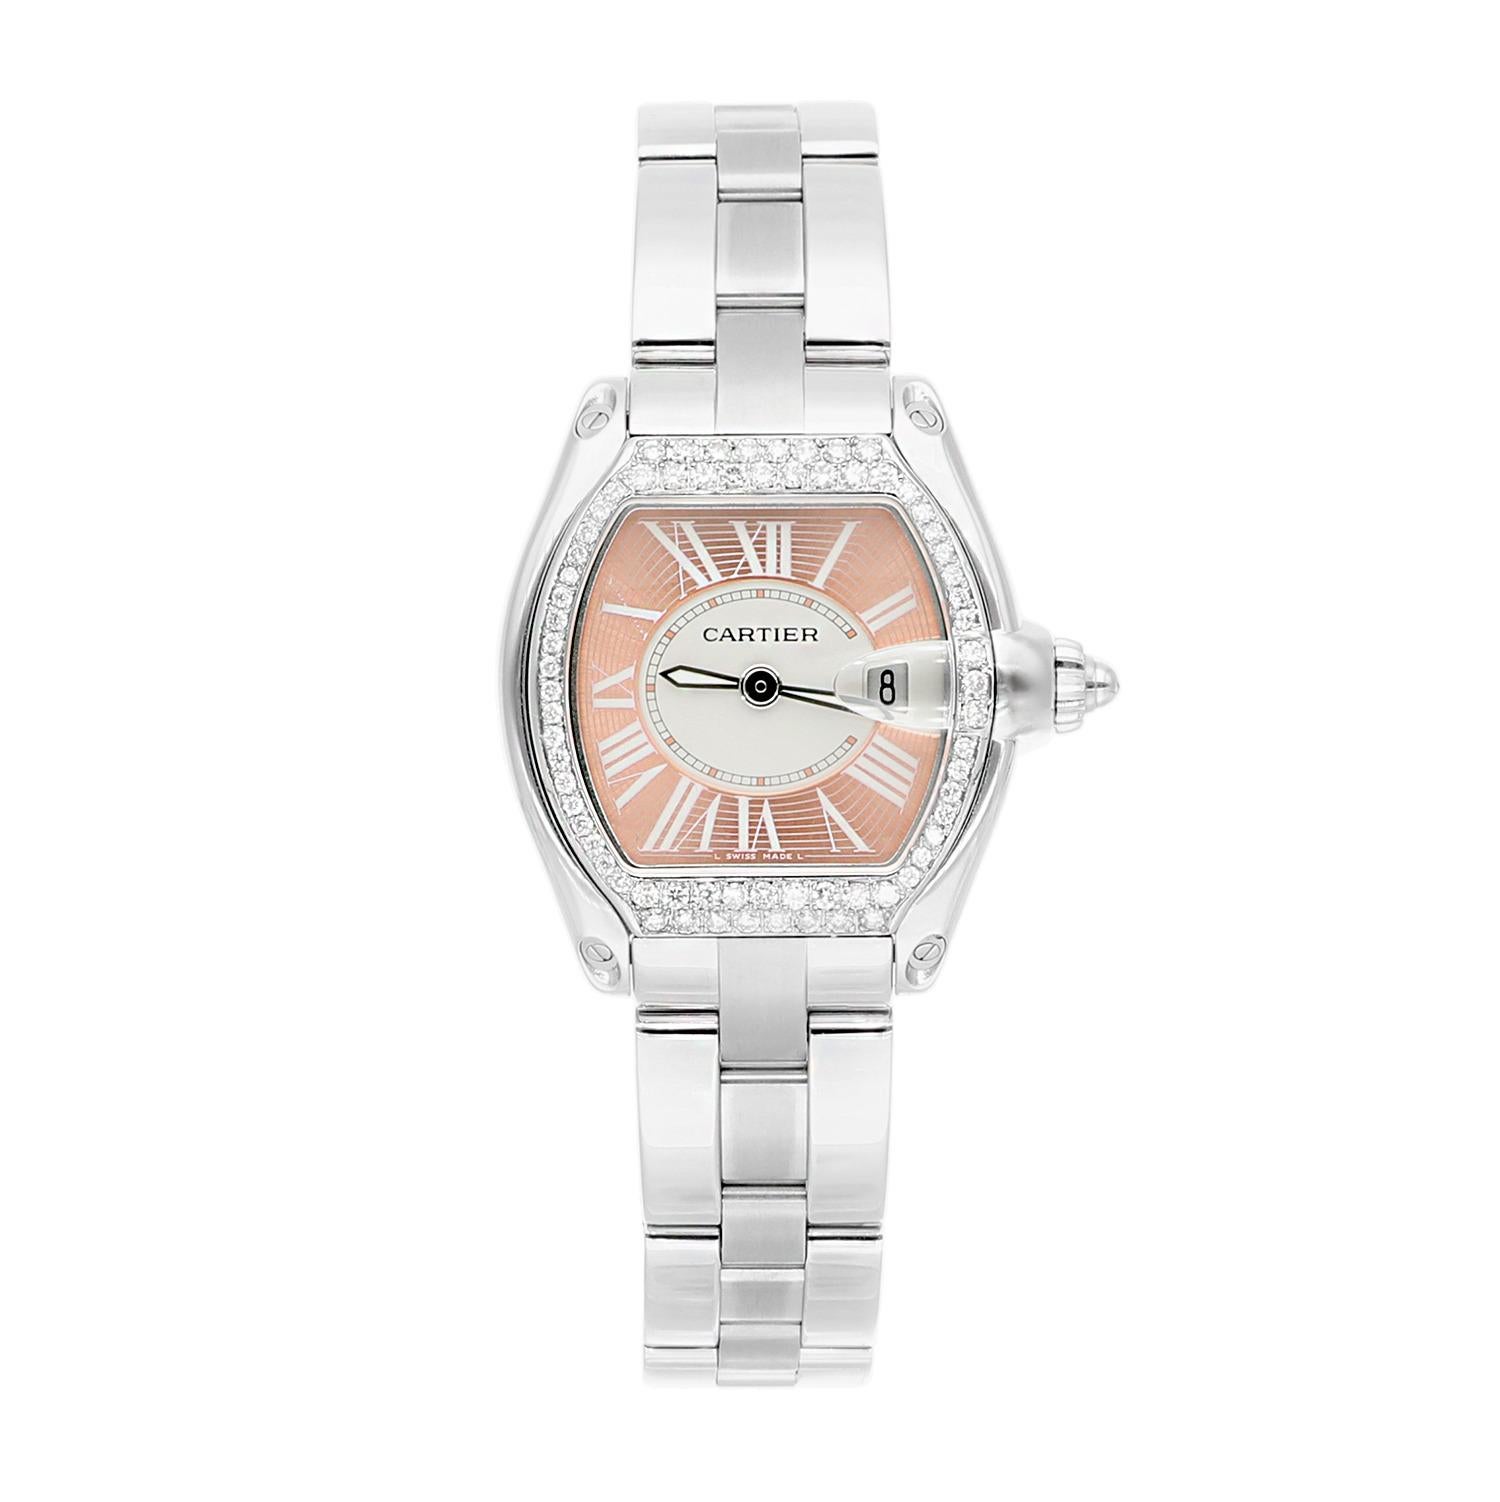 Cartier Roadster Small Ladies Peach Dial Stainless Steel Watch with Diamond Bezel
This watch has been professionally polished, serviced and is in excellent overall condition. There are absolutely no visible scratches or blemishes. Diamonds were